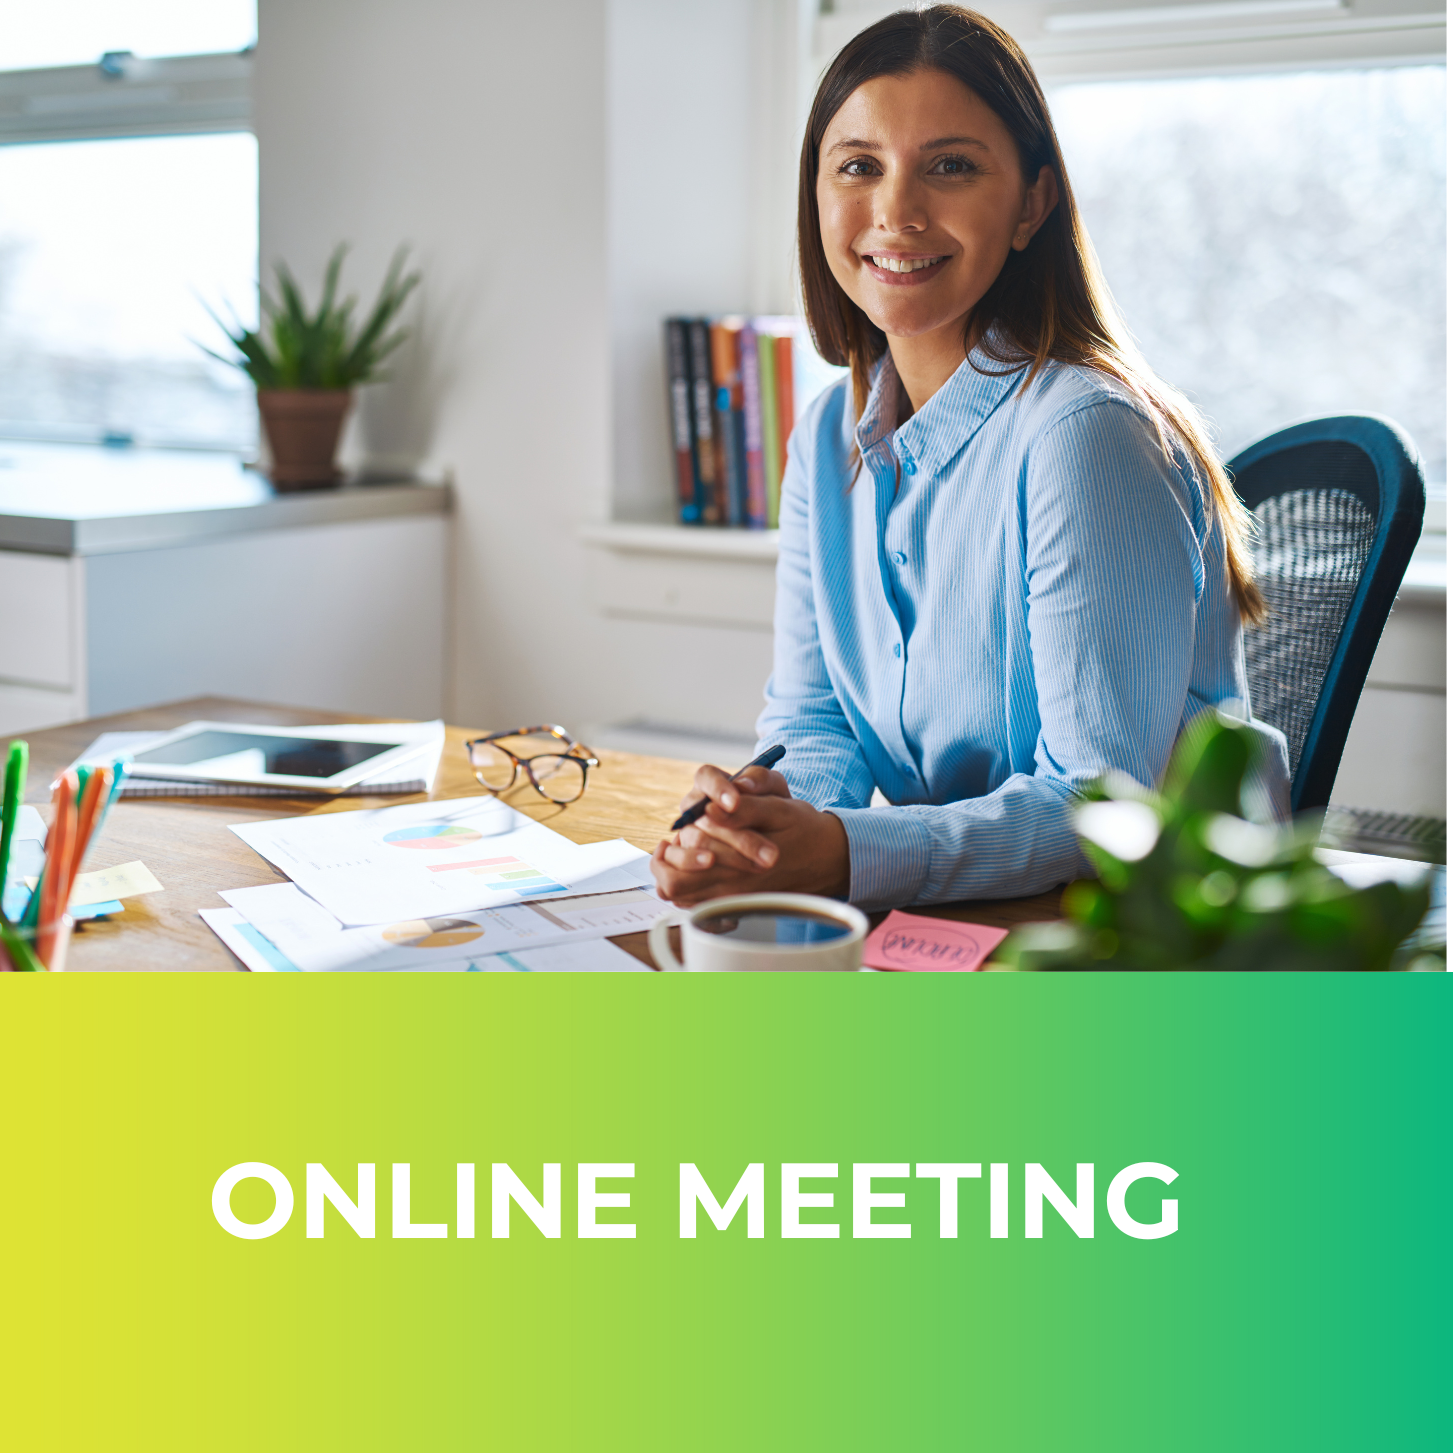  Book an online meeting with eevie. Find out how our employee engagement app and programmes can help implement your corporate sustainability  strategy and boost employee satisfaction.